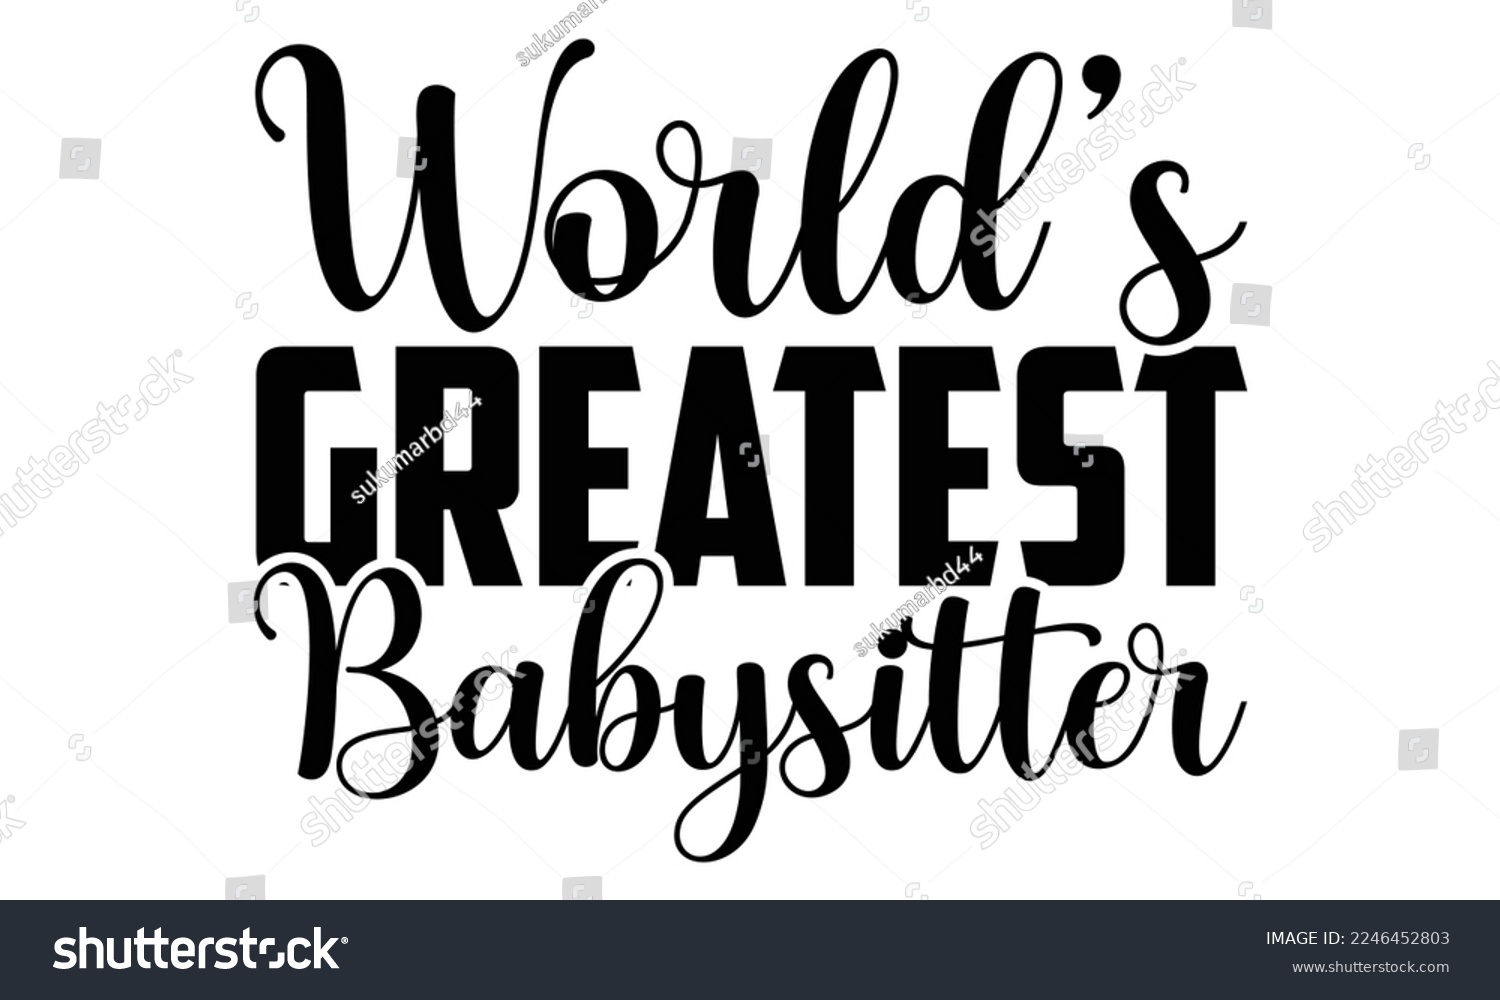 SVG of World’s Greatest Babysitter - Babysitting svg quotes Design, Cutting Machine, Silhouette Cameo, t-shirt, Hand drawn lettering phrase isolated on white background. svg